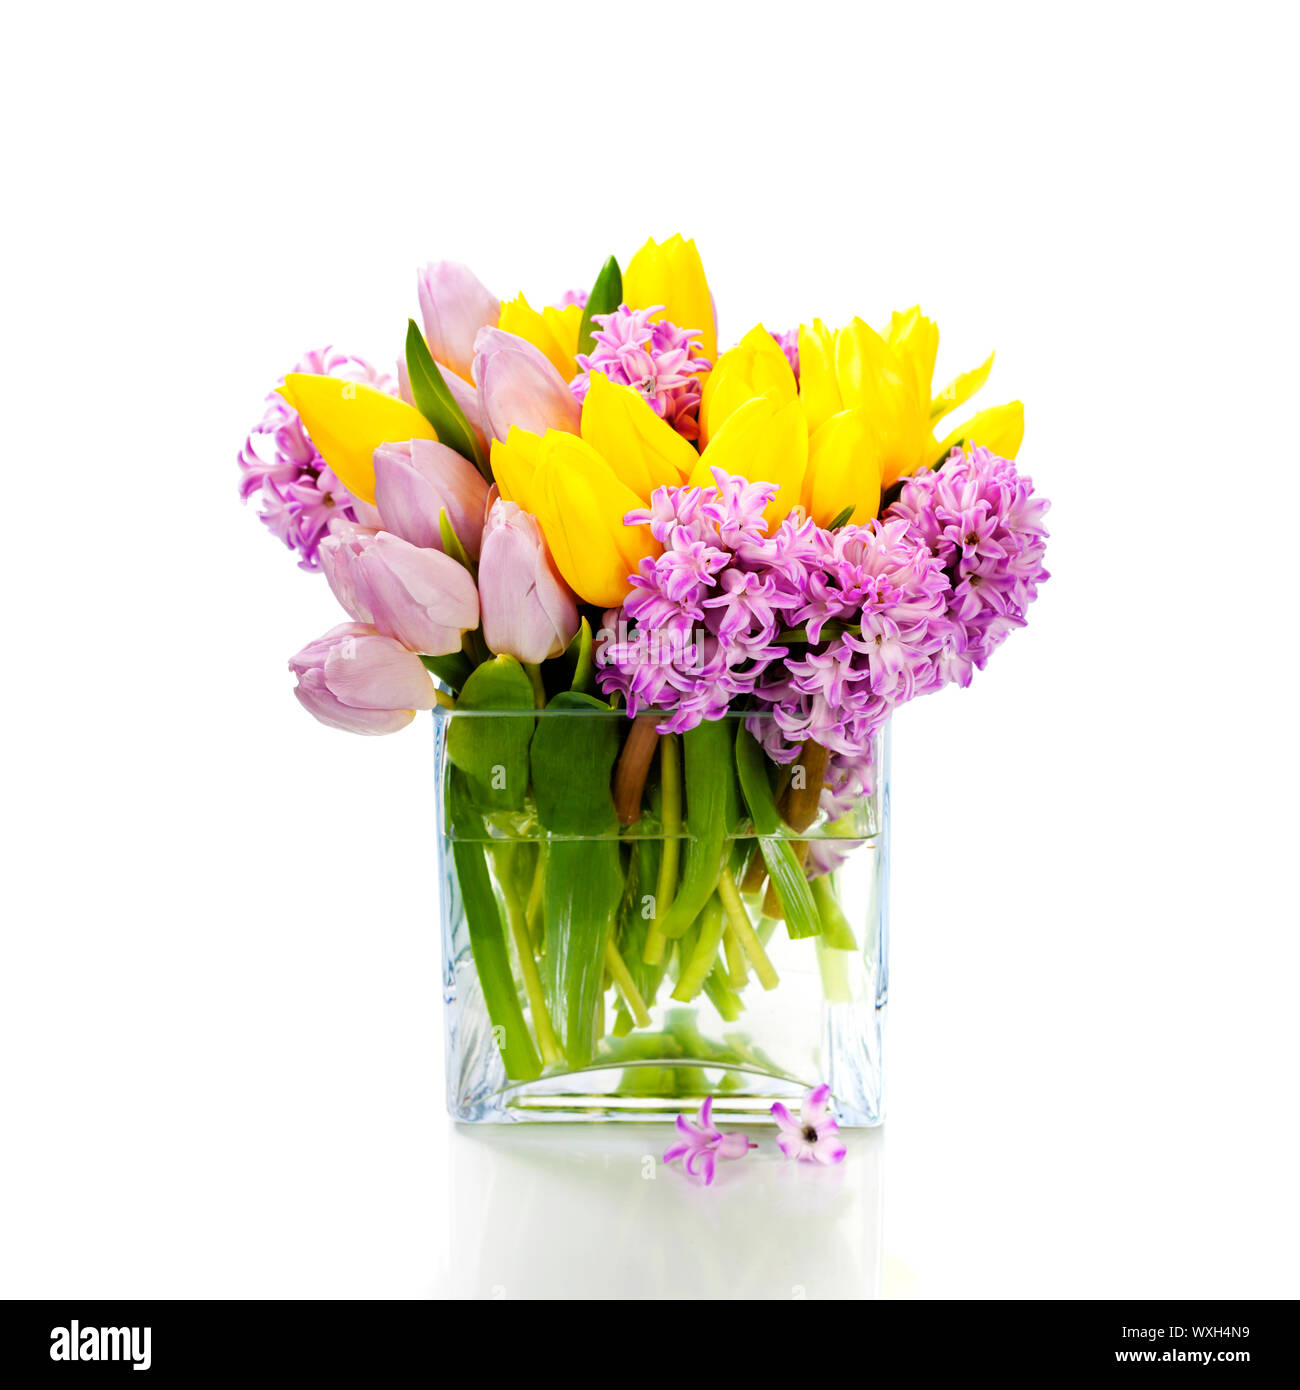 Beautiful spring flowers in vase over white Stock Photo